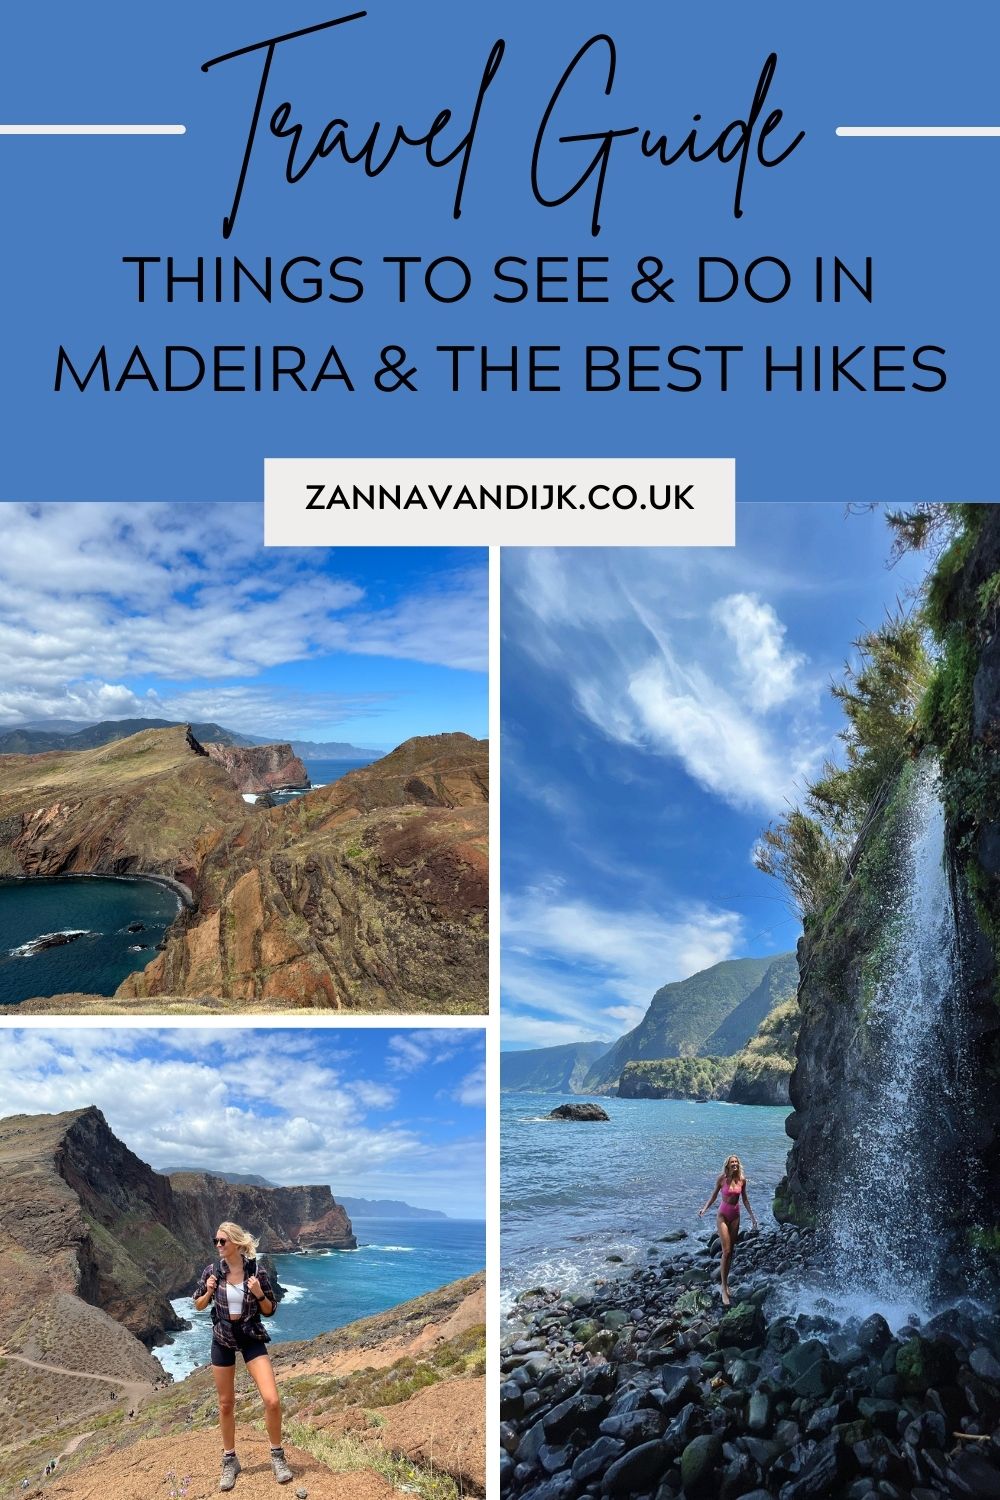 Things to see and do in madeira - use for pinterest for Madeira Travel Guide